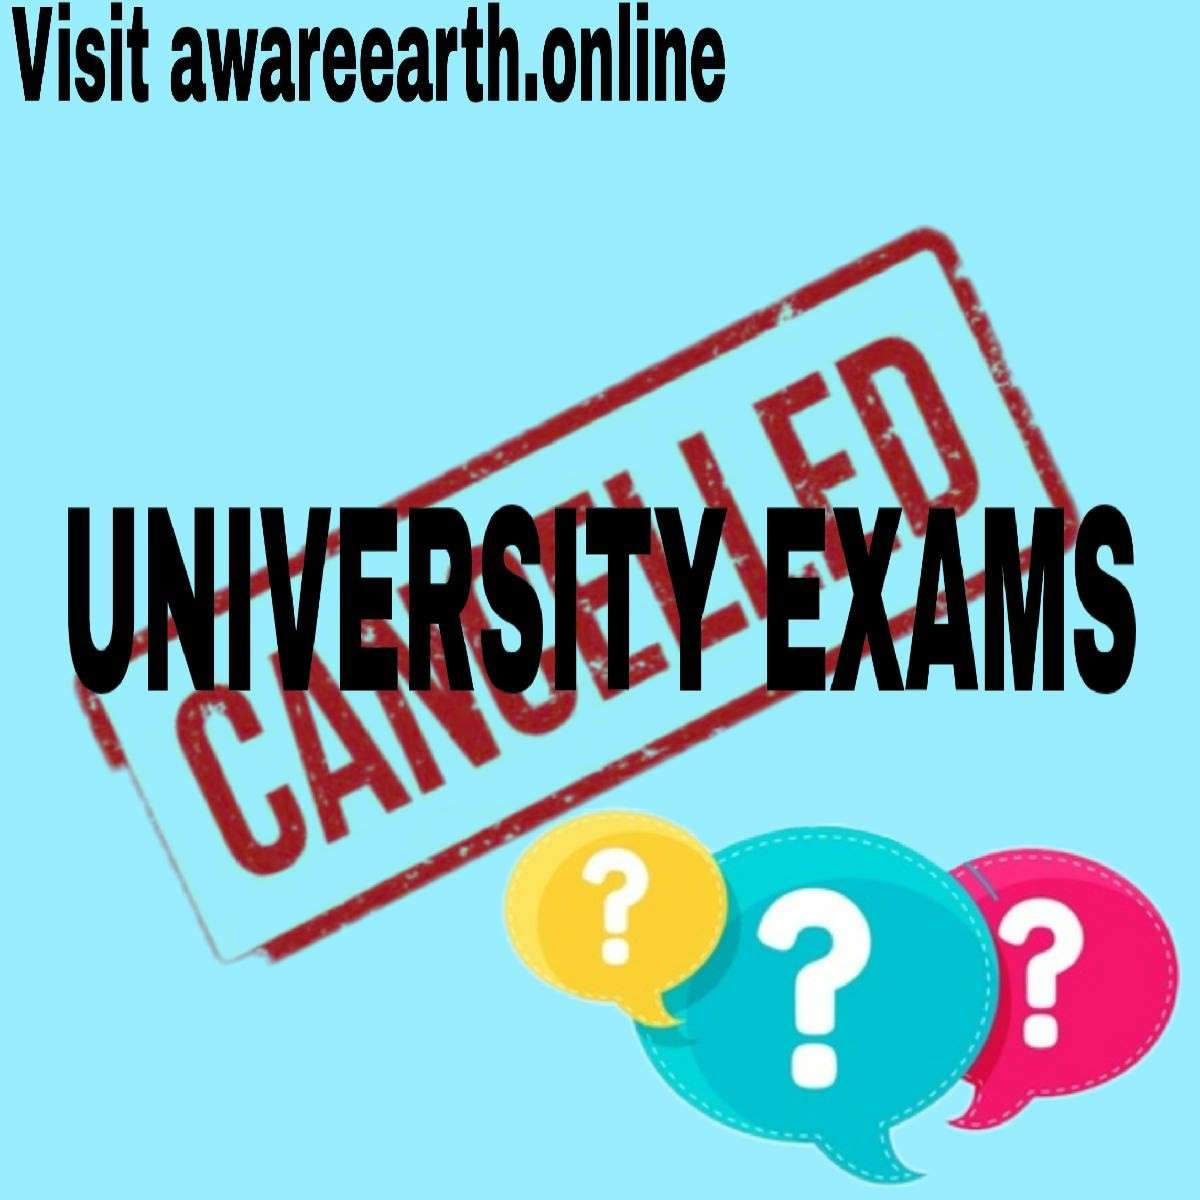 University exams likely to be cancelled